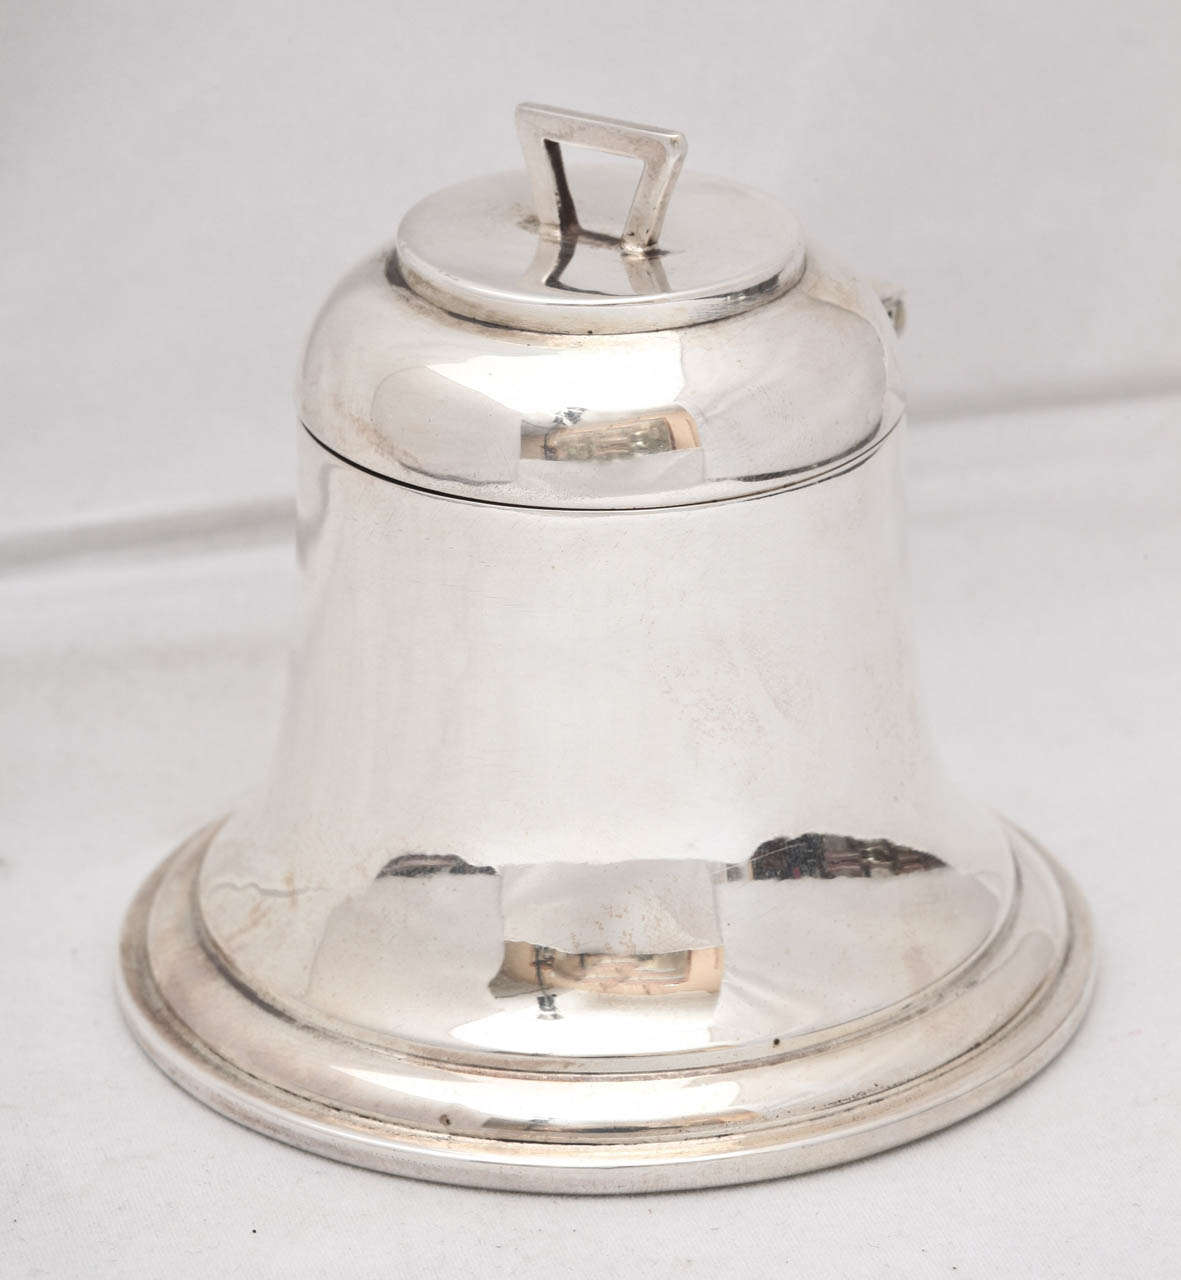 Edwardian, sterling silver, bell form inkwell, Birmingham, England, 1910, A & J Zimmerman - makers. Leather underside; has glass insert for ink. @3 1/4